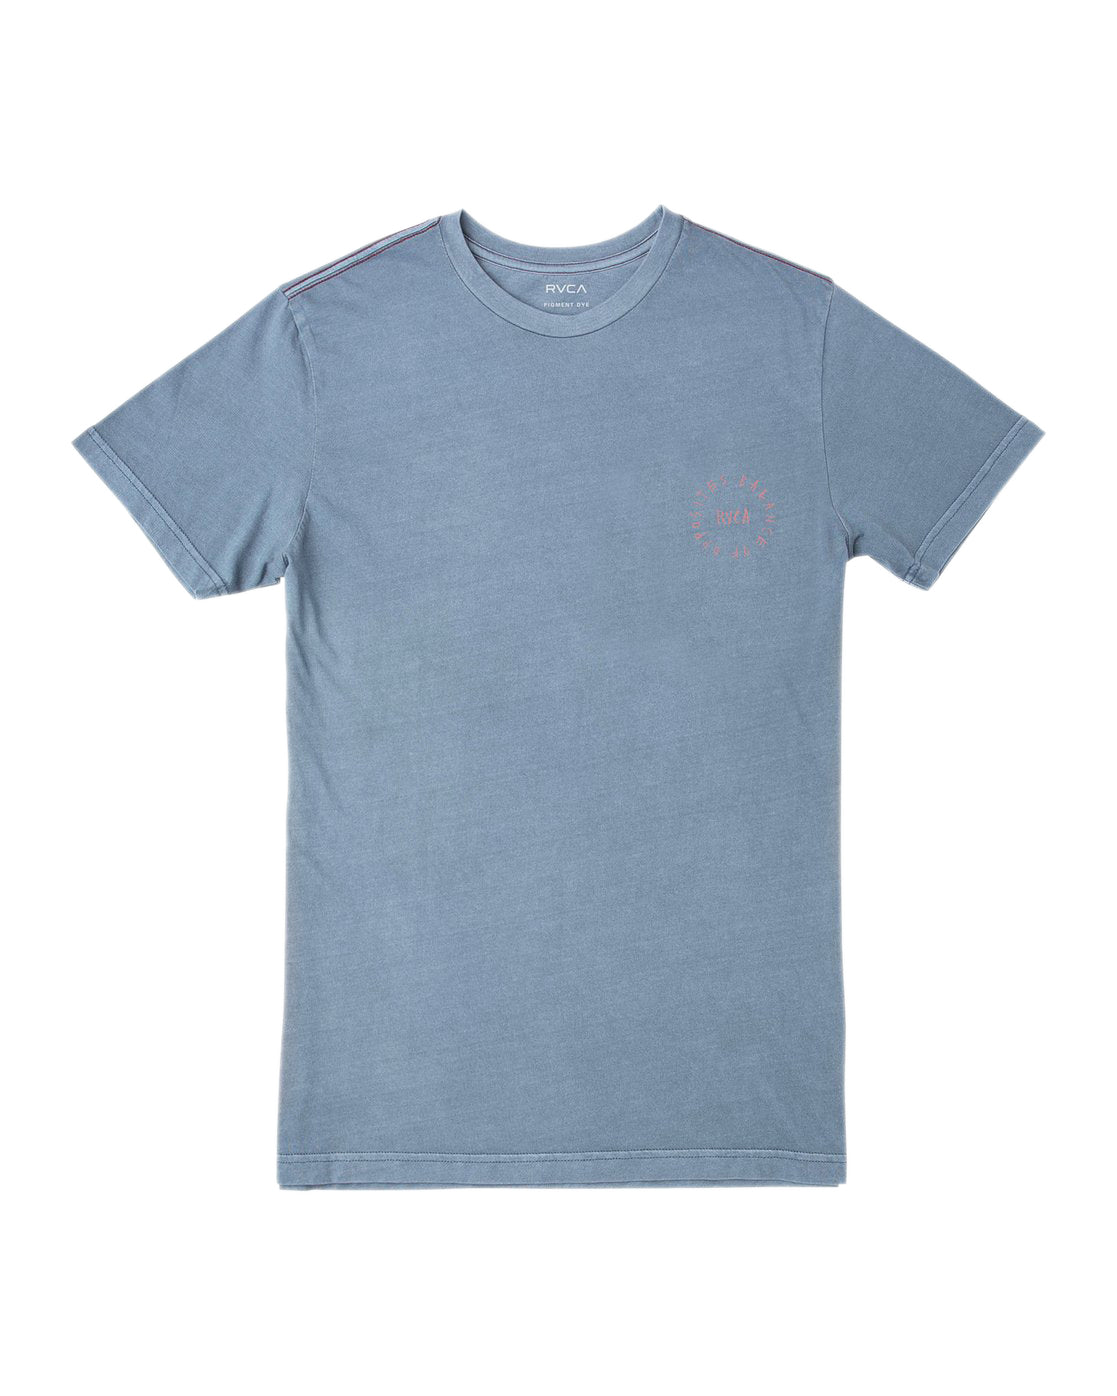 RVCA Hortonsphere SS Tee CNB-ChinaBlue S